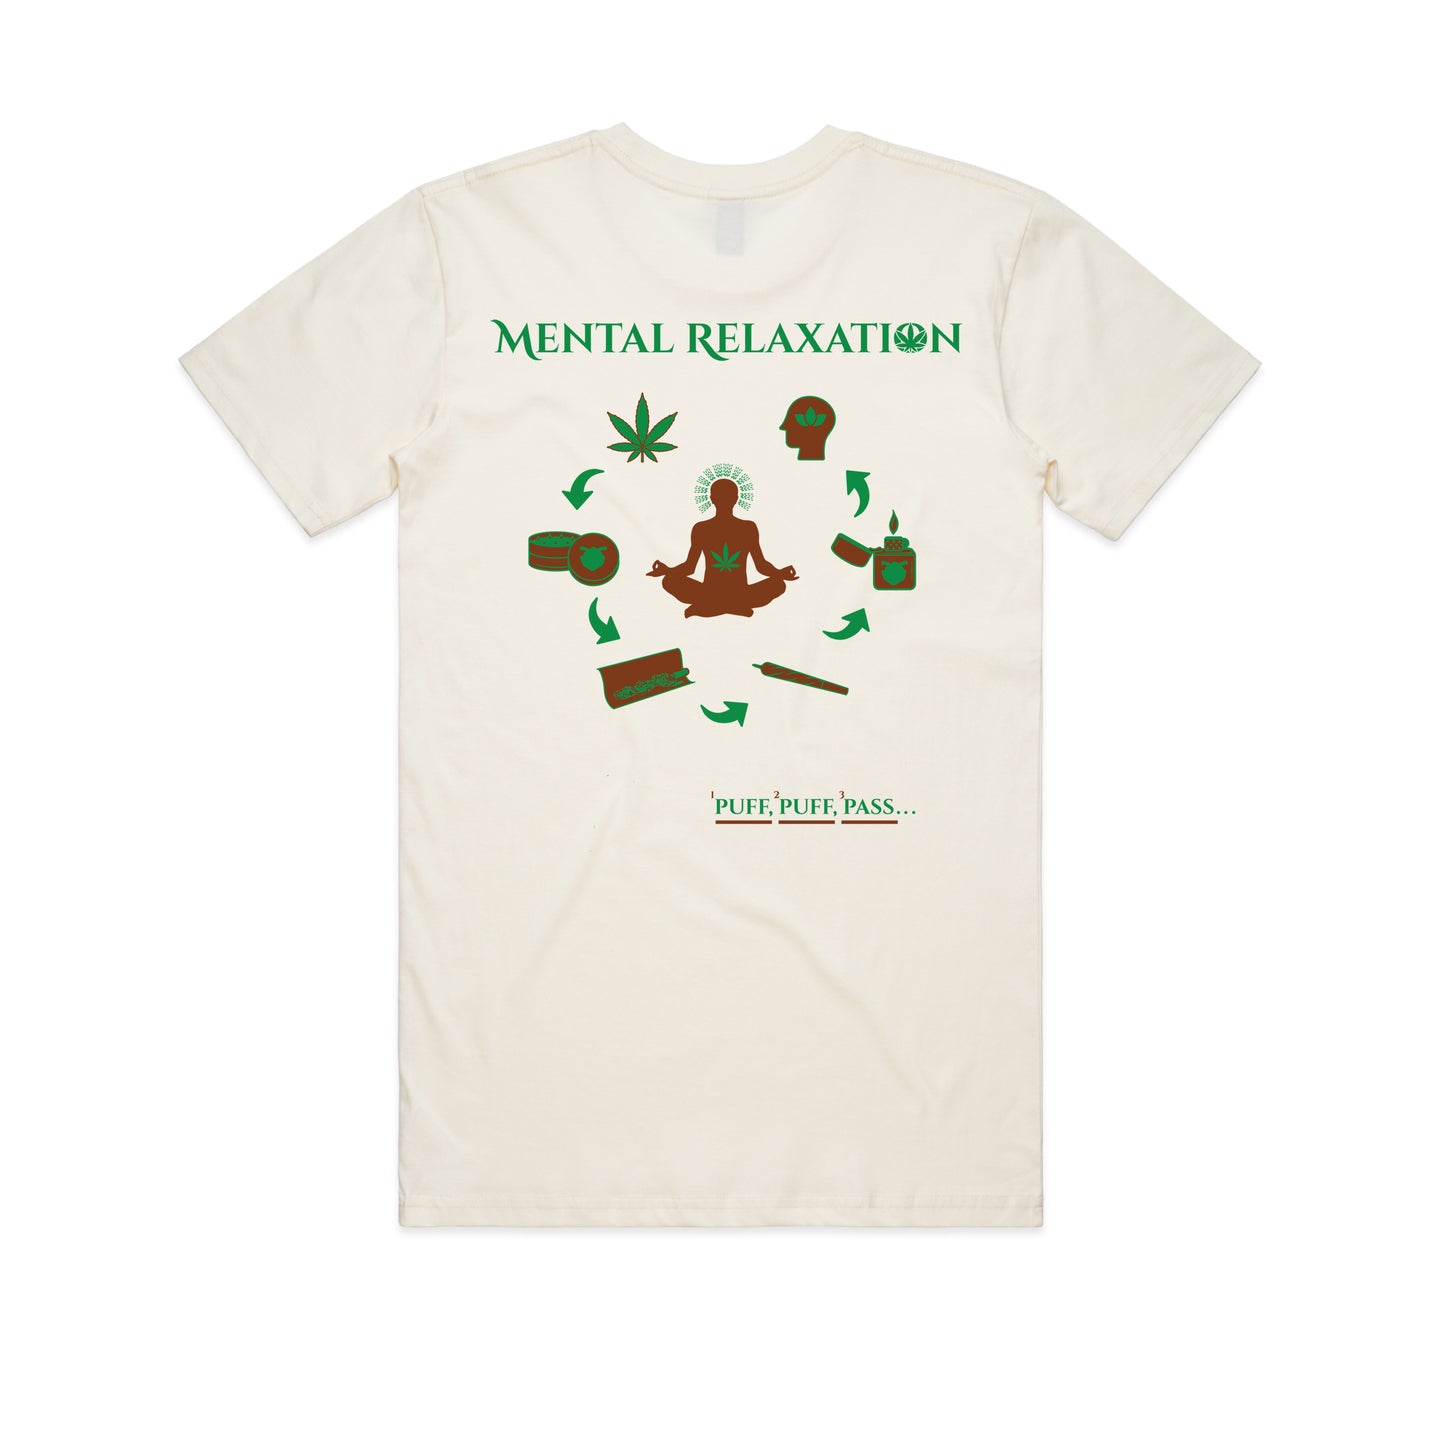 Mental Relaxation Unisex T-Shirt - Natural